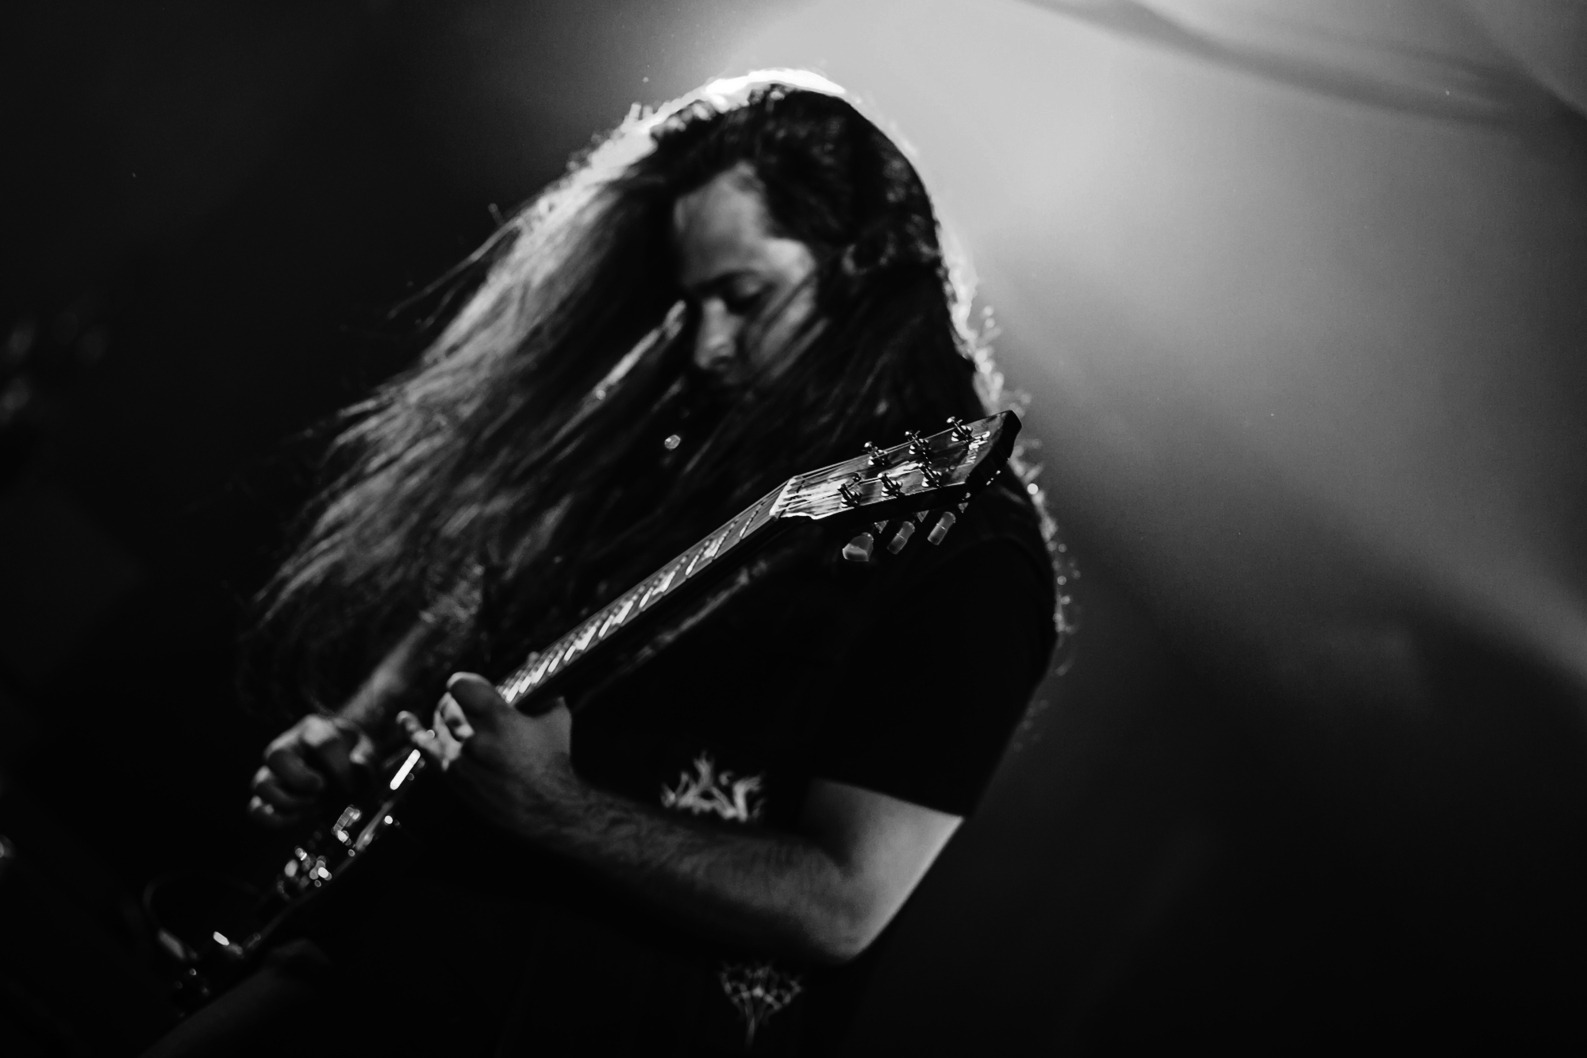 You are currently viewing Οι Black Metallers SELBST ανακοίνωσαν το νέο άλμπουμ «Despondency Chord Progressions» και κυκλοφόρησαν το νέο single « Chant Of Self Confrontation».